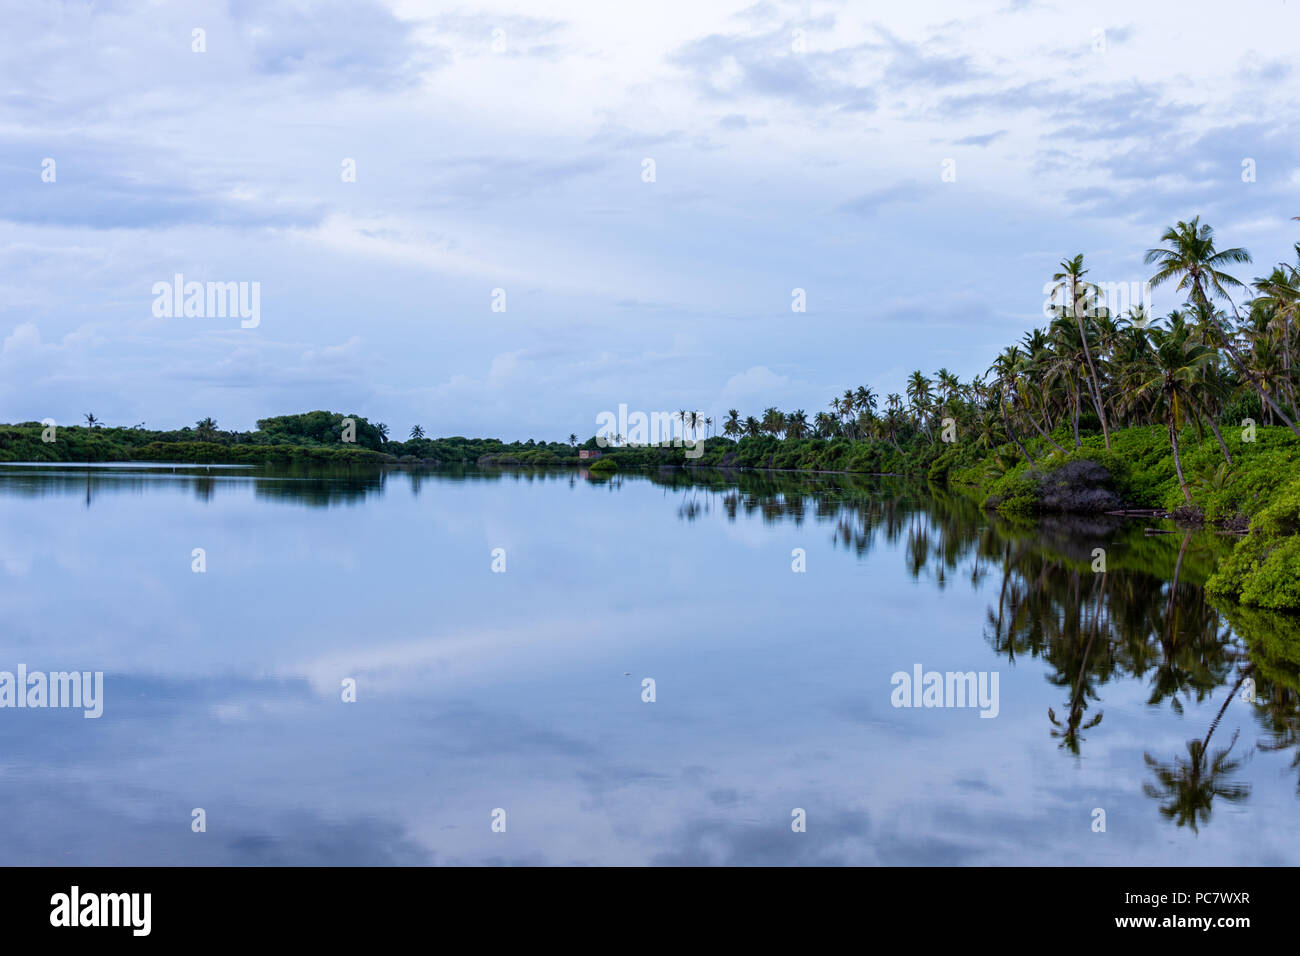 Amazing view from the lake side. This photo is taken from Addu City of Maldives Stock Photo